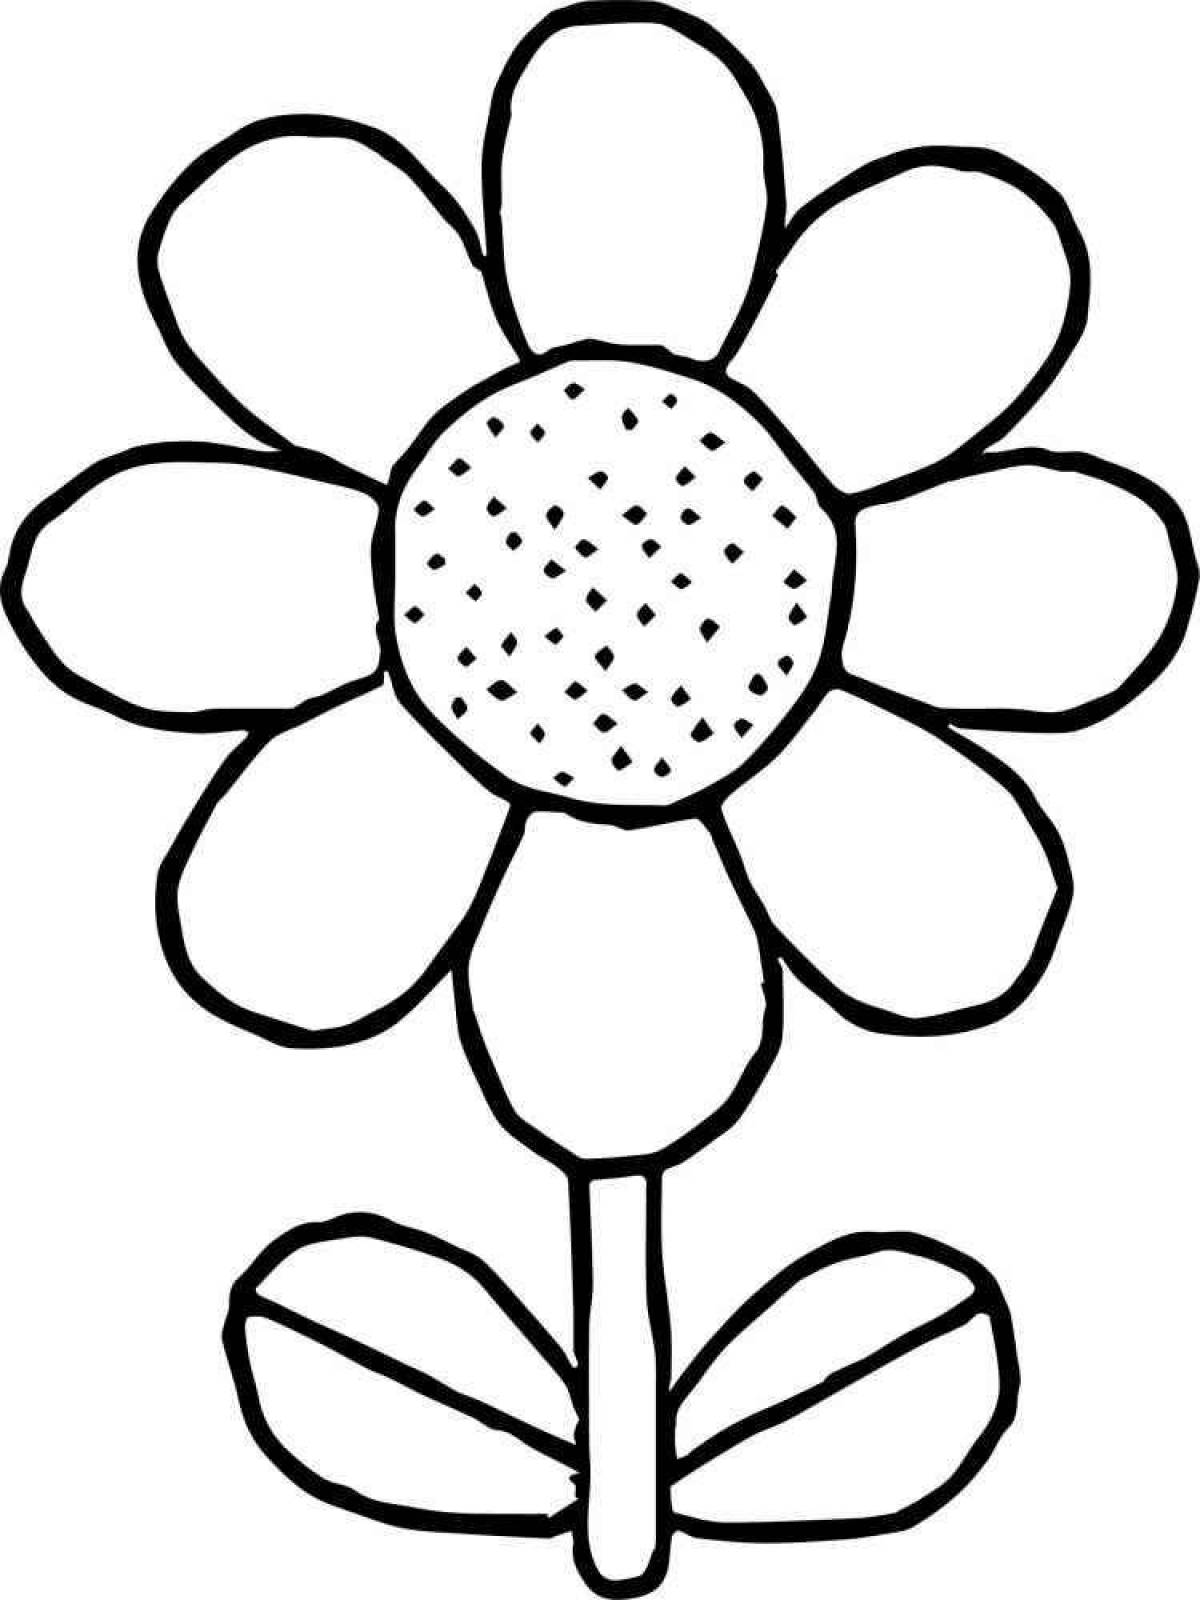 Delightful coloring page 